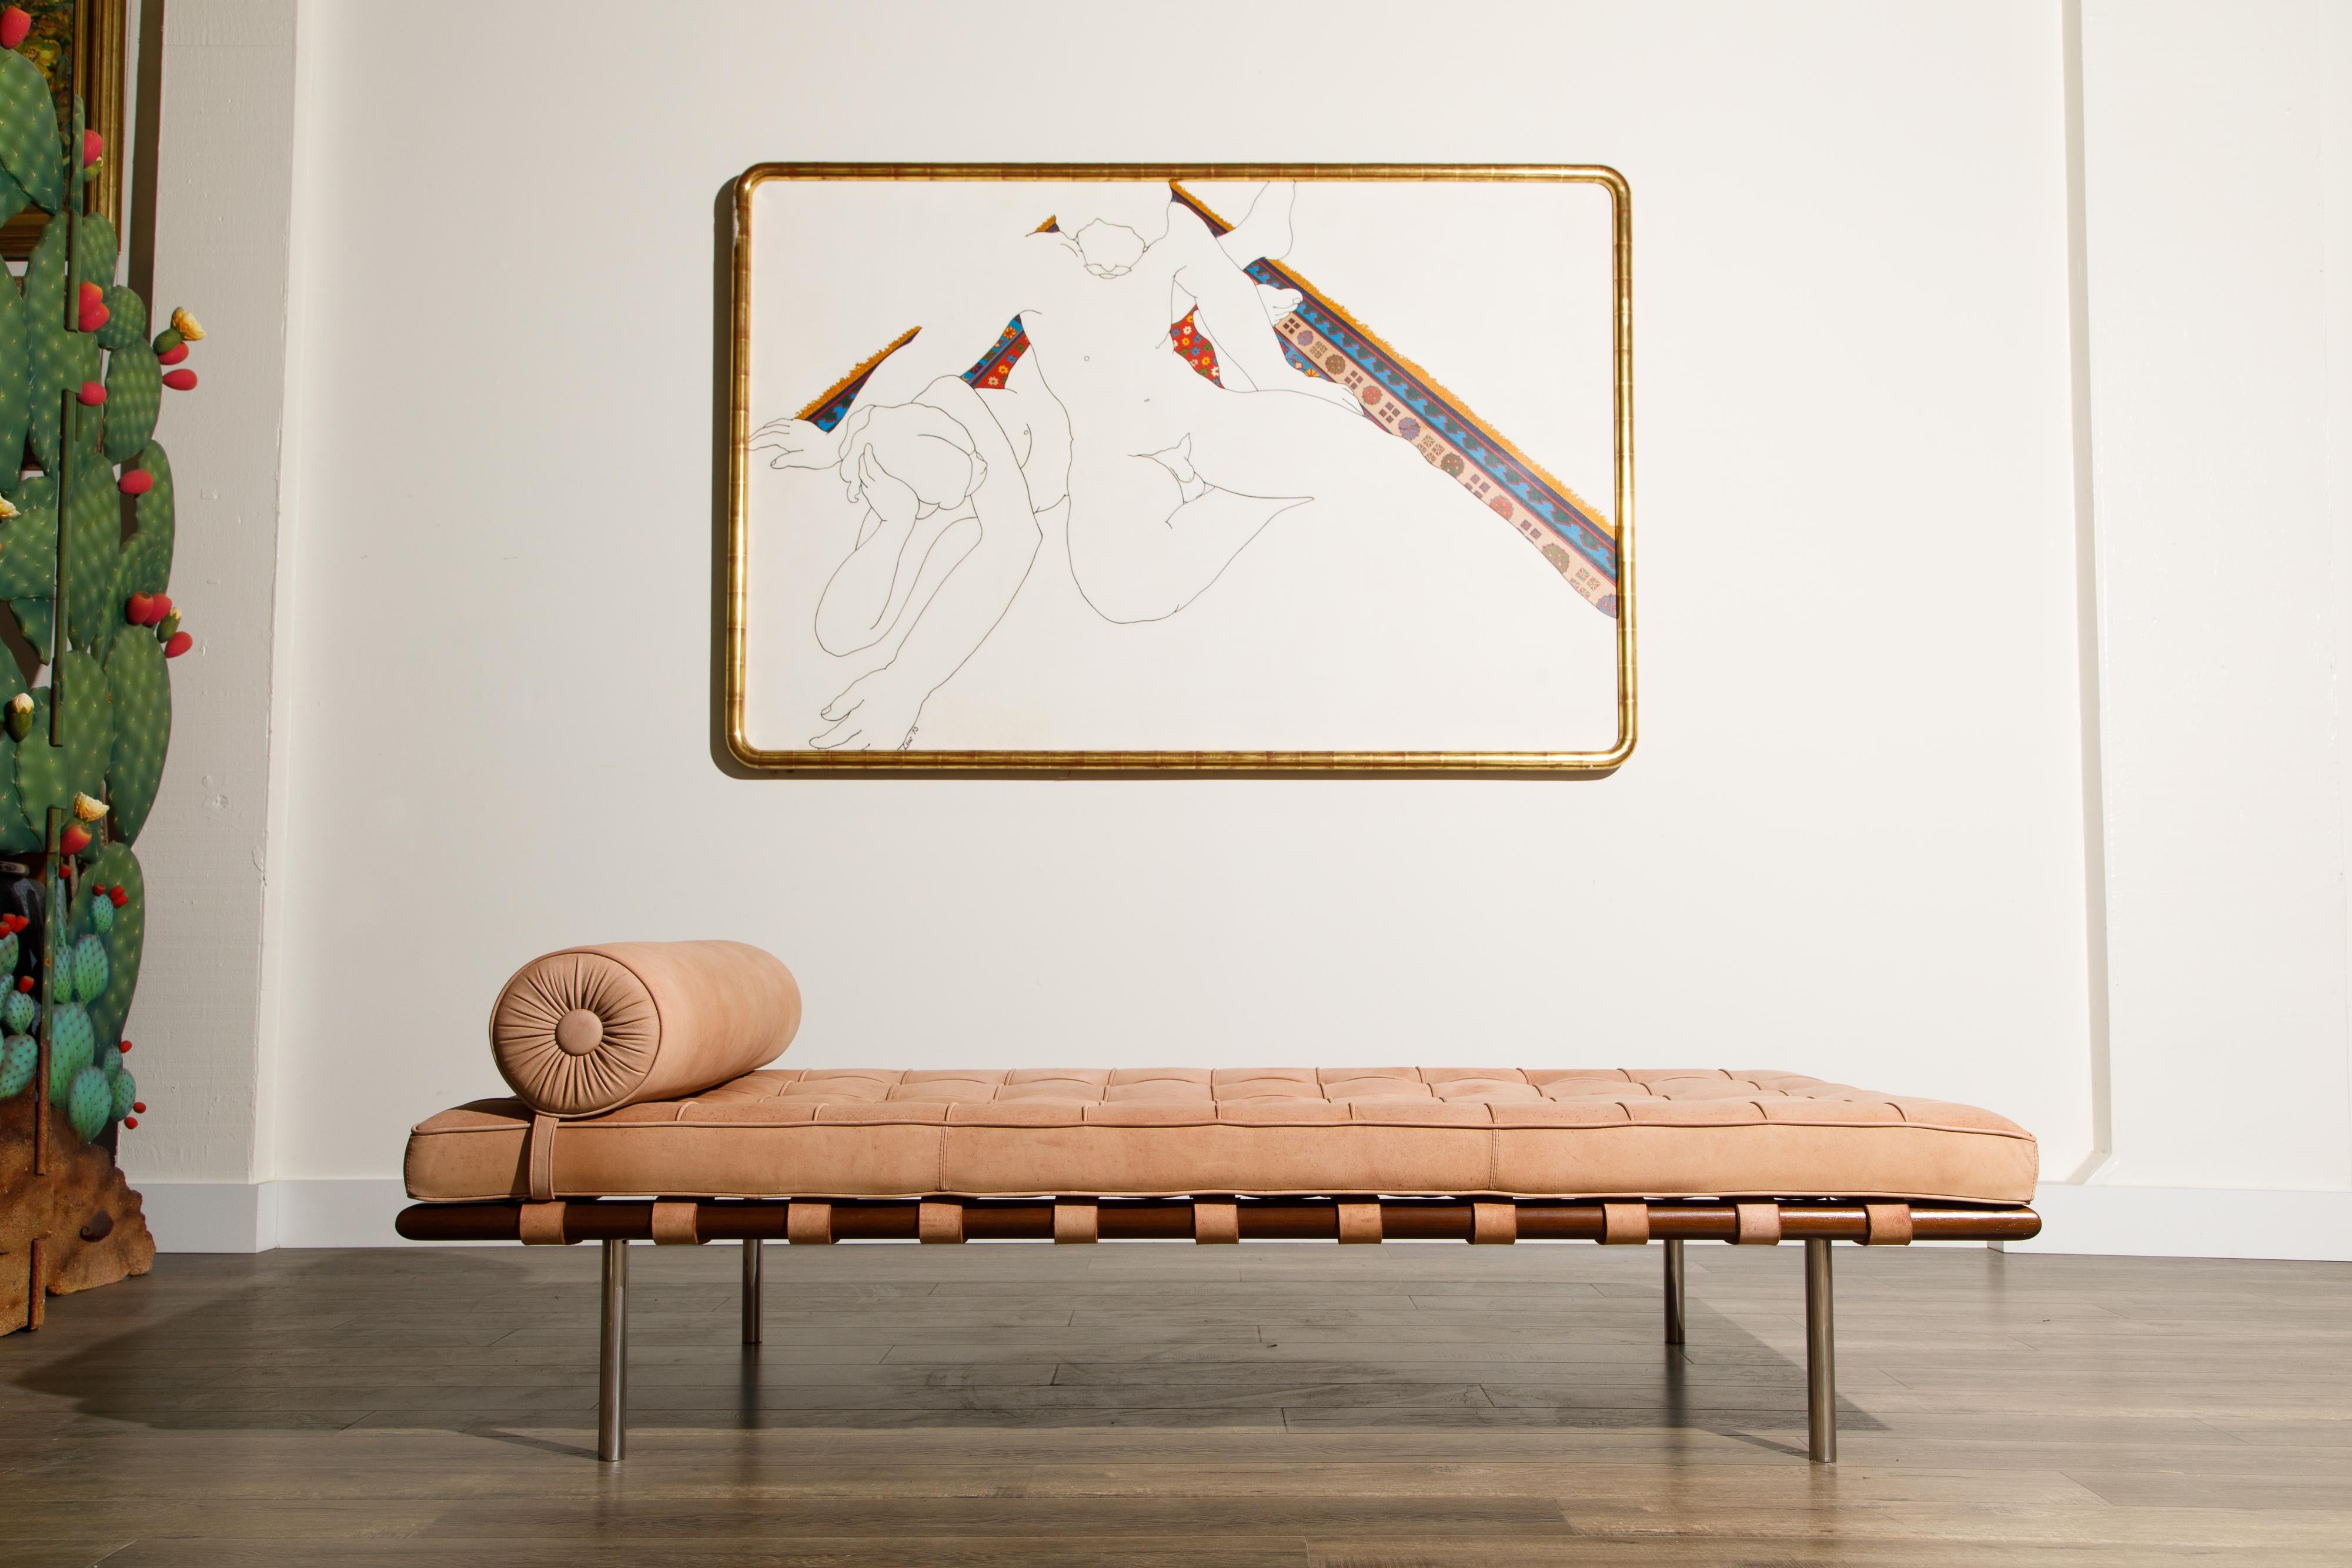 This fantastic Barcelona Daybed by Ludwig Mies Van Der Rohe for Knoll is in a breathtaking nude color (peachy tan with some pink undertones) high quality bovine suede. Thick and a substantial hand feel with incredible texture, as you would expect